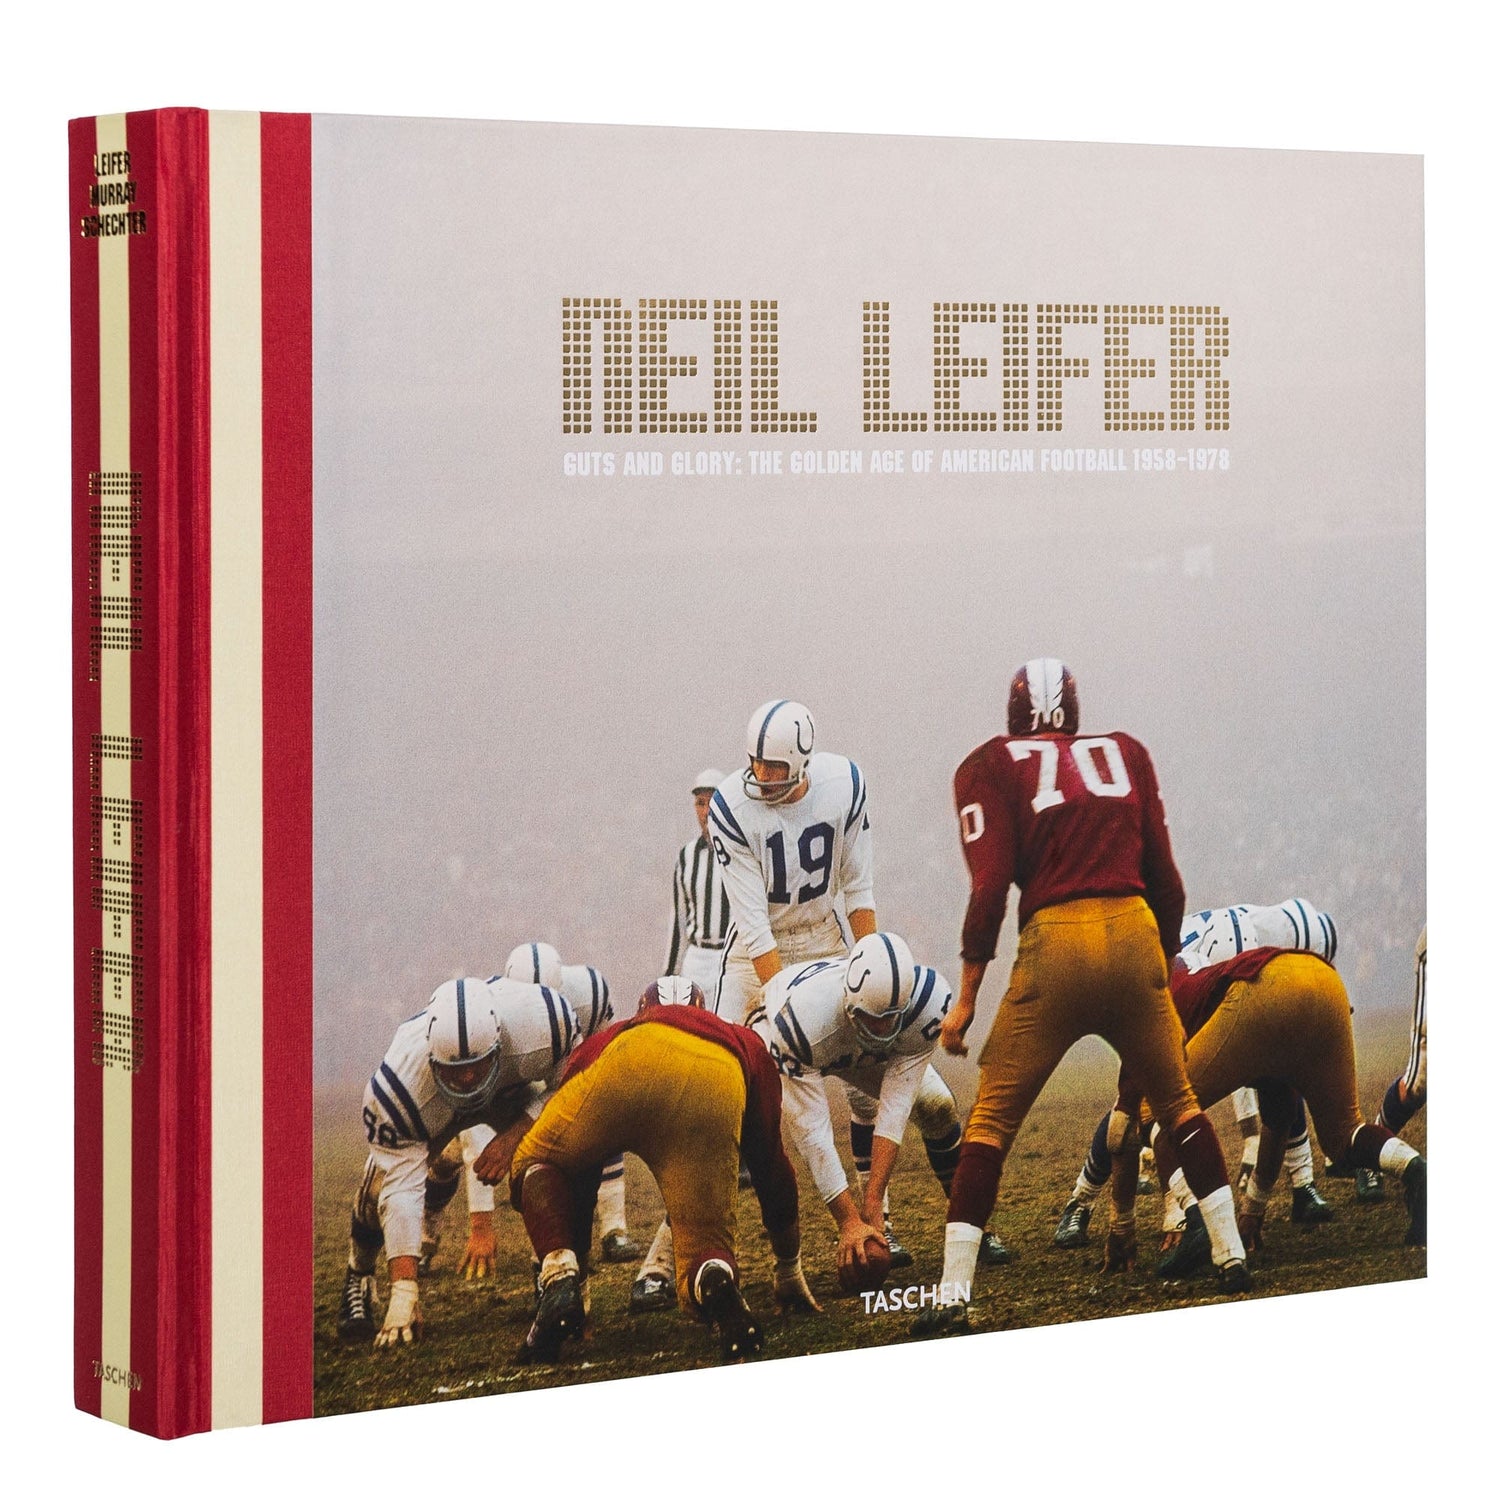 Neil Leifer: Guts & Glory “The Golden Age of American Football 1958-1978 Front View